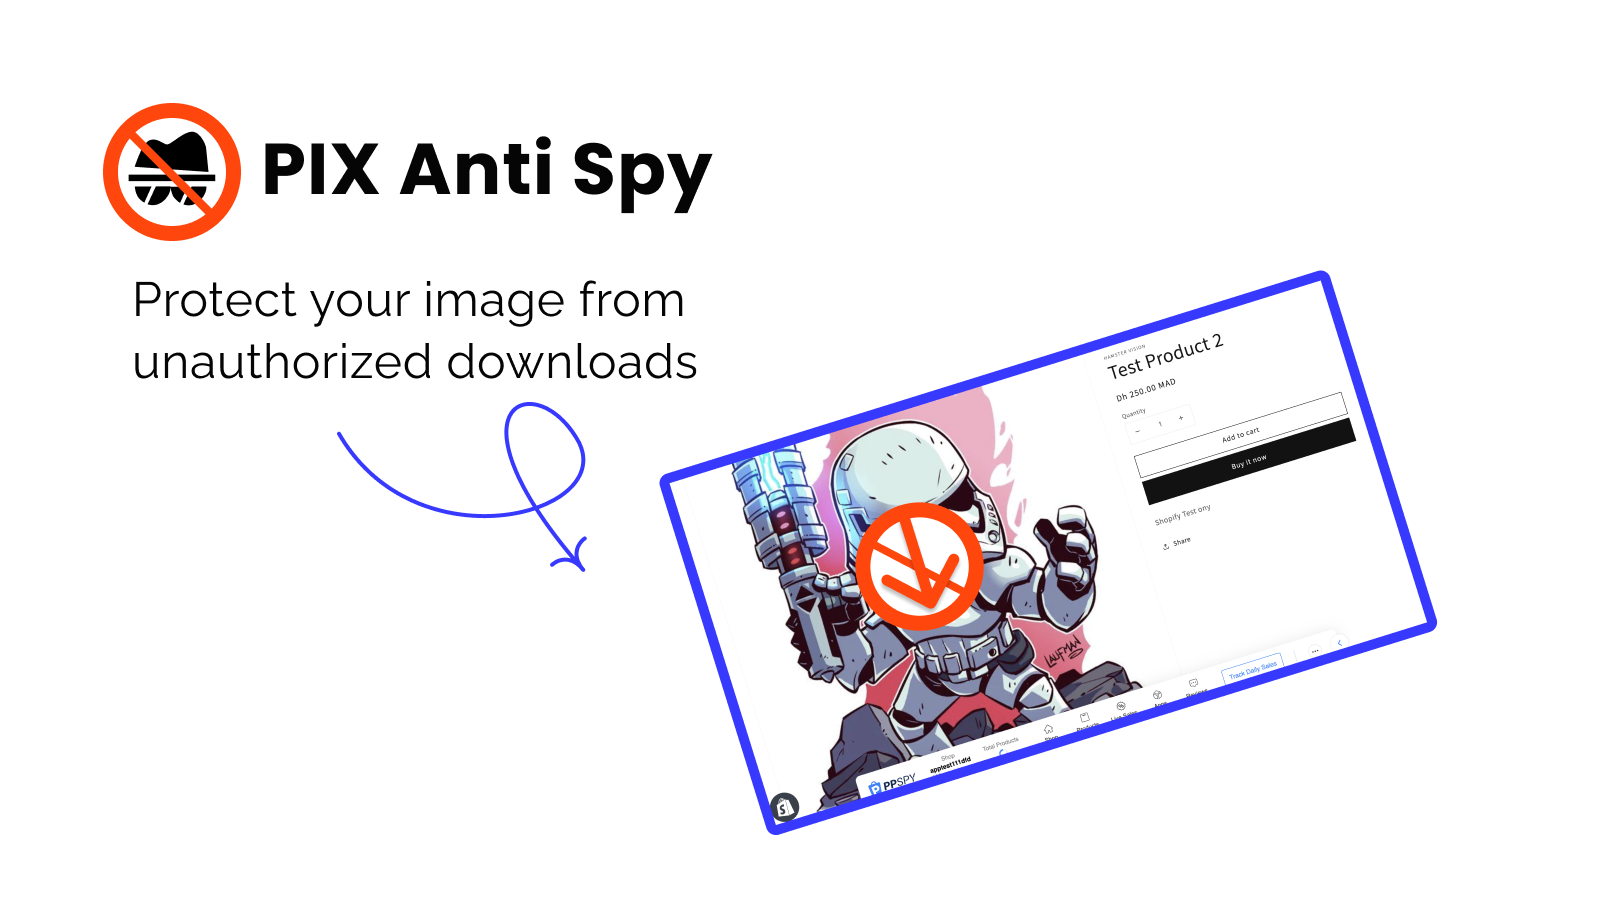 PIX - Anti Spy app that helps protect your store's data